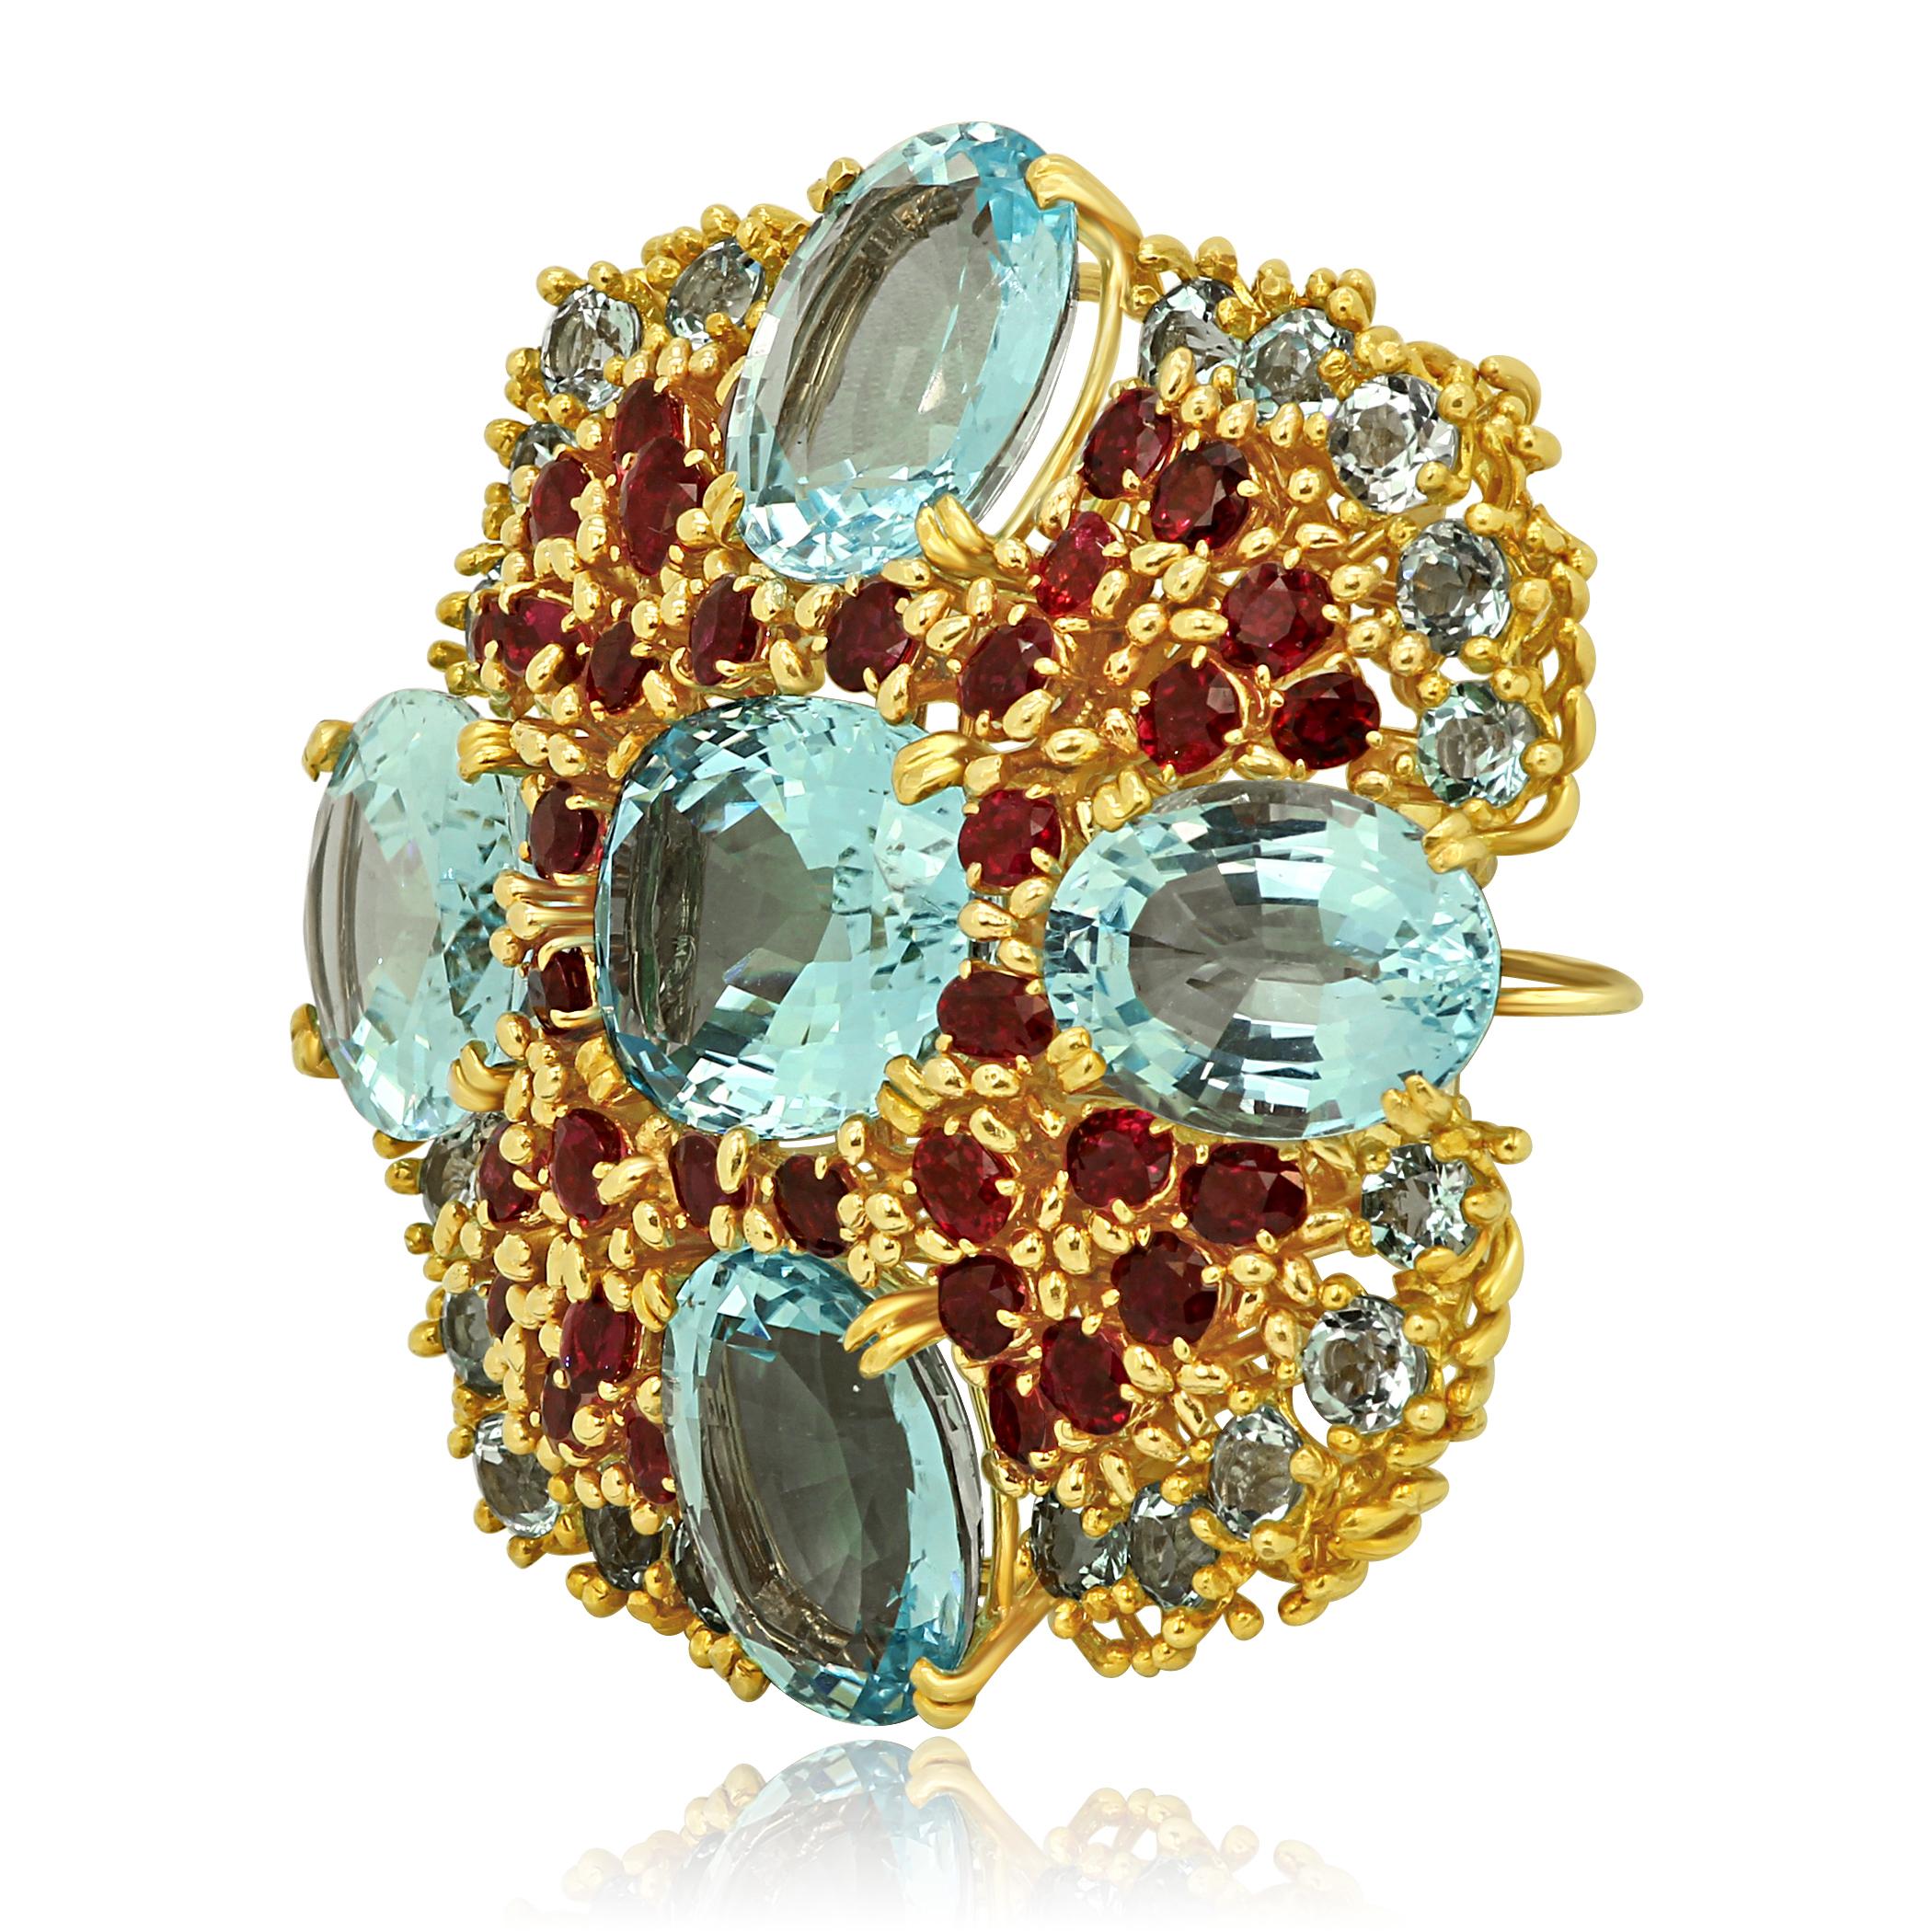 Stunning Blue Topaz Round and Oval Approximately 100 Carats With Ruby ovals Approximately 15 Carats in 18K Yellow Gold Handmade One of a kind Brooch Pendant.

Total Stone Weight Approximately 115 Carats.